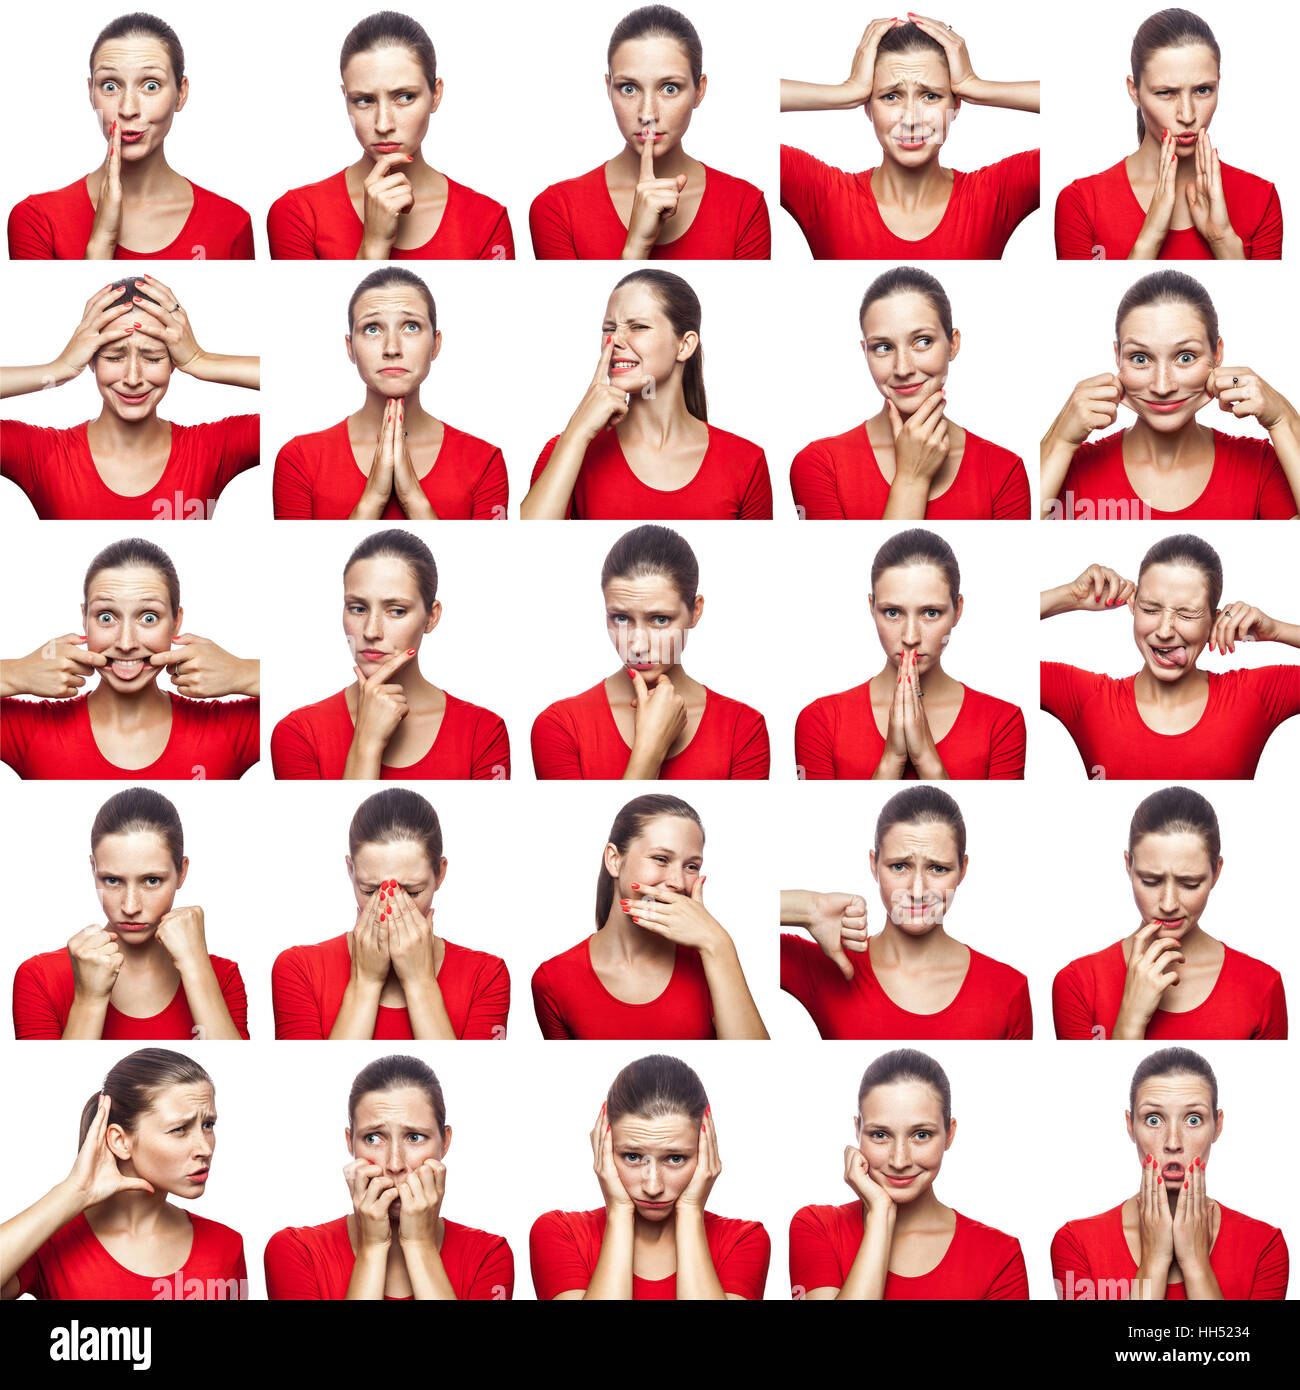 Mosaic of woman with freckles expressing different emotions expressions. The woman with red t-shirt with 16 different emotions. Stock Photo